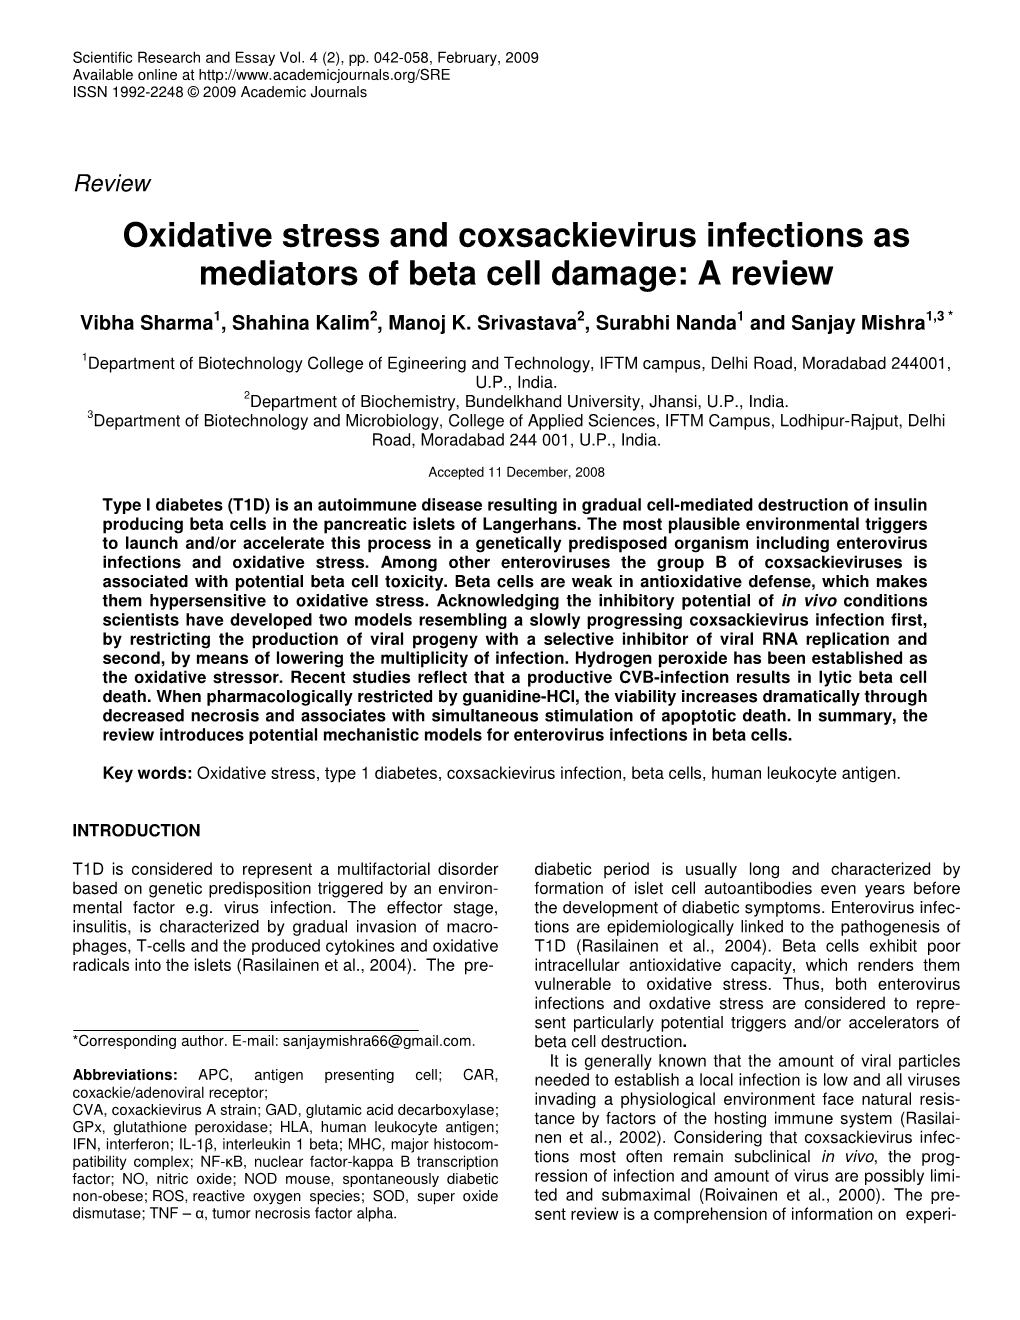 Oxidative Stress and Coxsackievirus Infections As Mediators of Beta Cell Damage: a Review